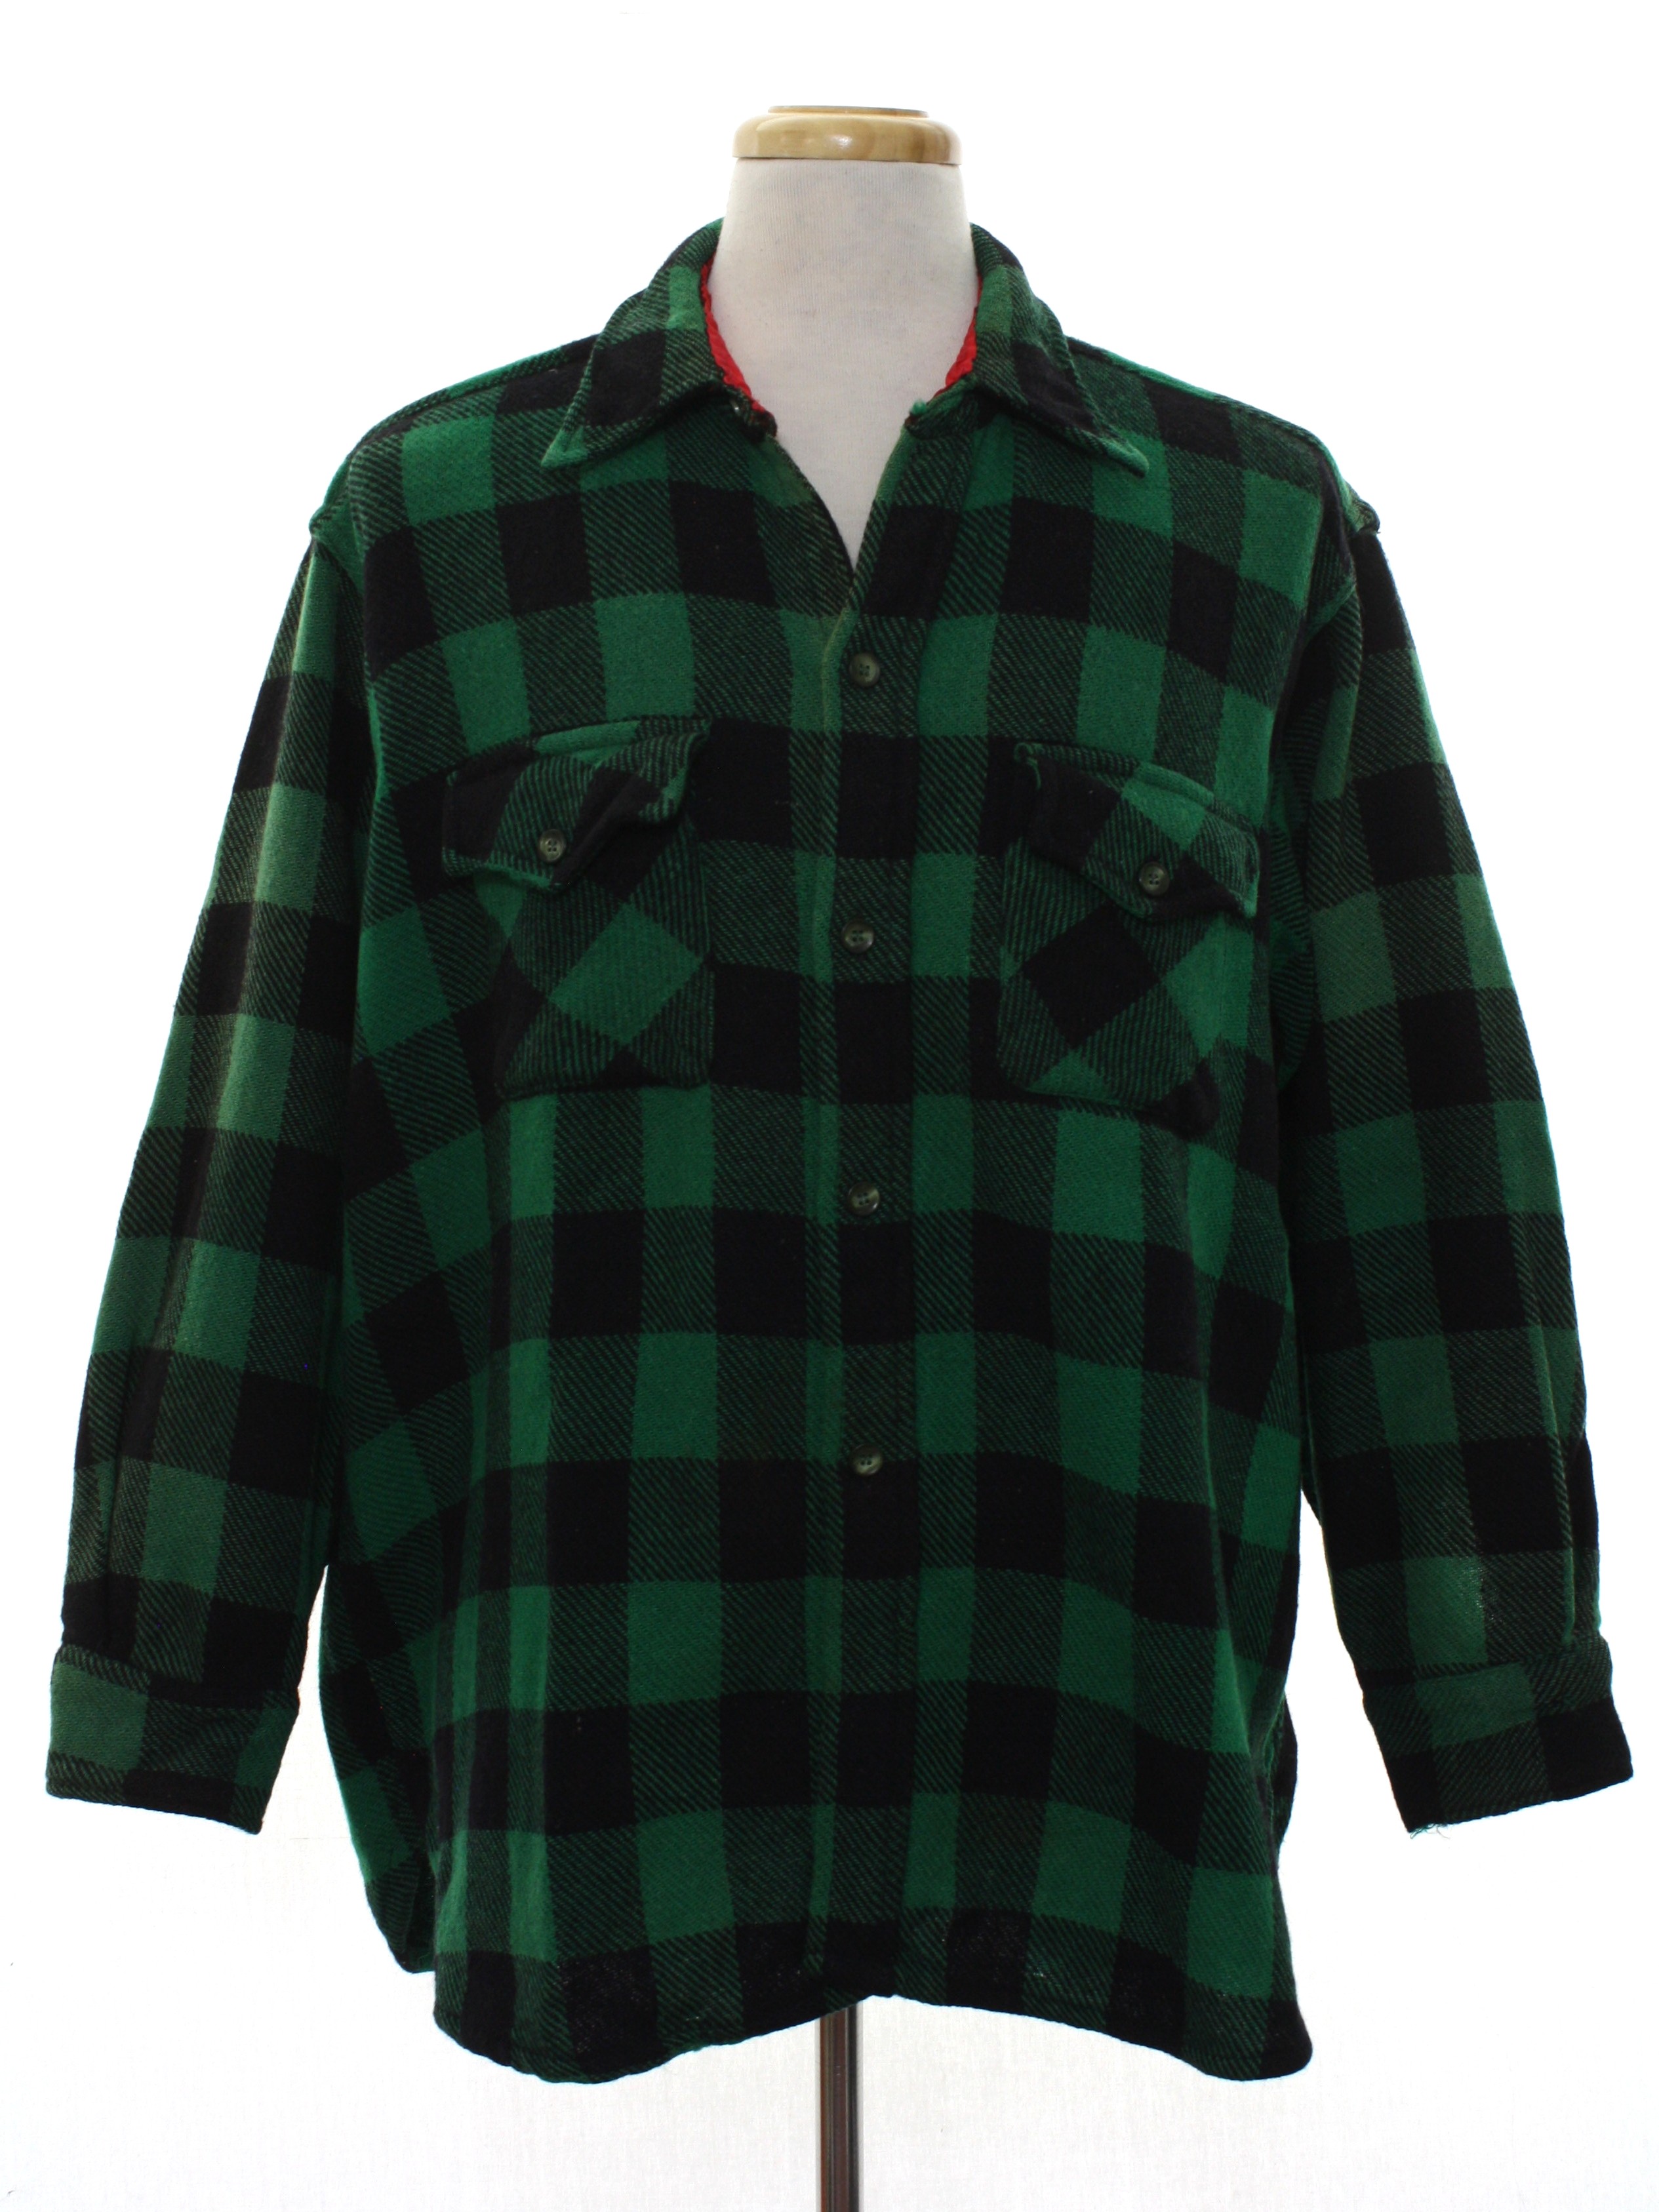 Vintage 1960's Wool Shirt: 60s -Pennys Towncraft- Mens green and black ...